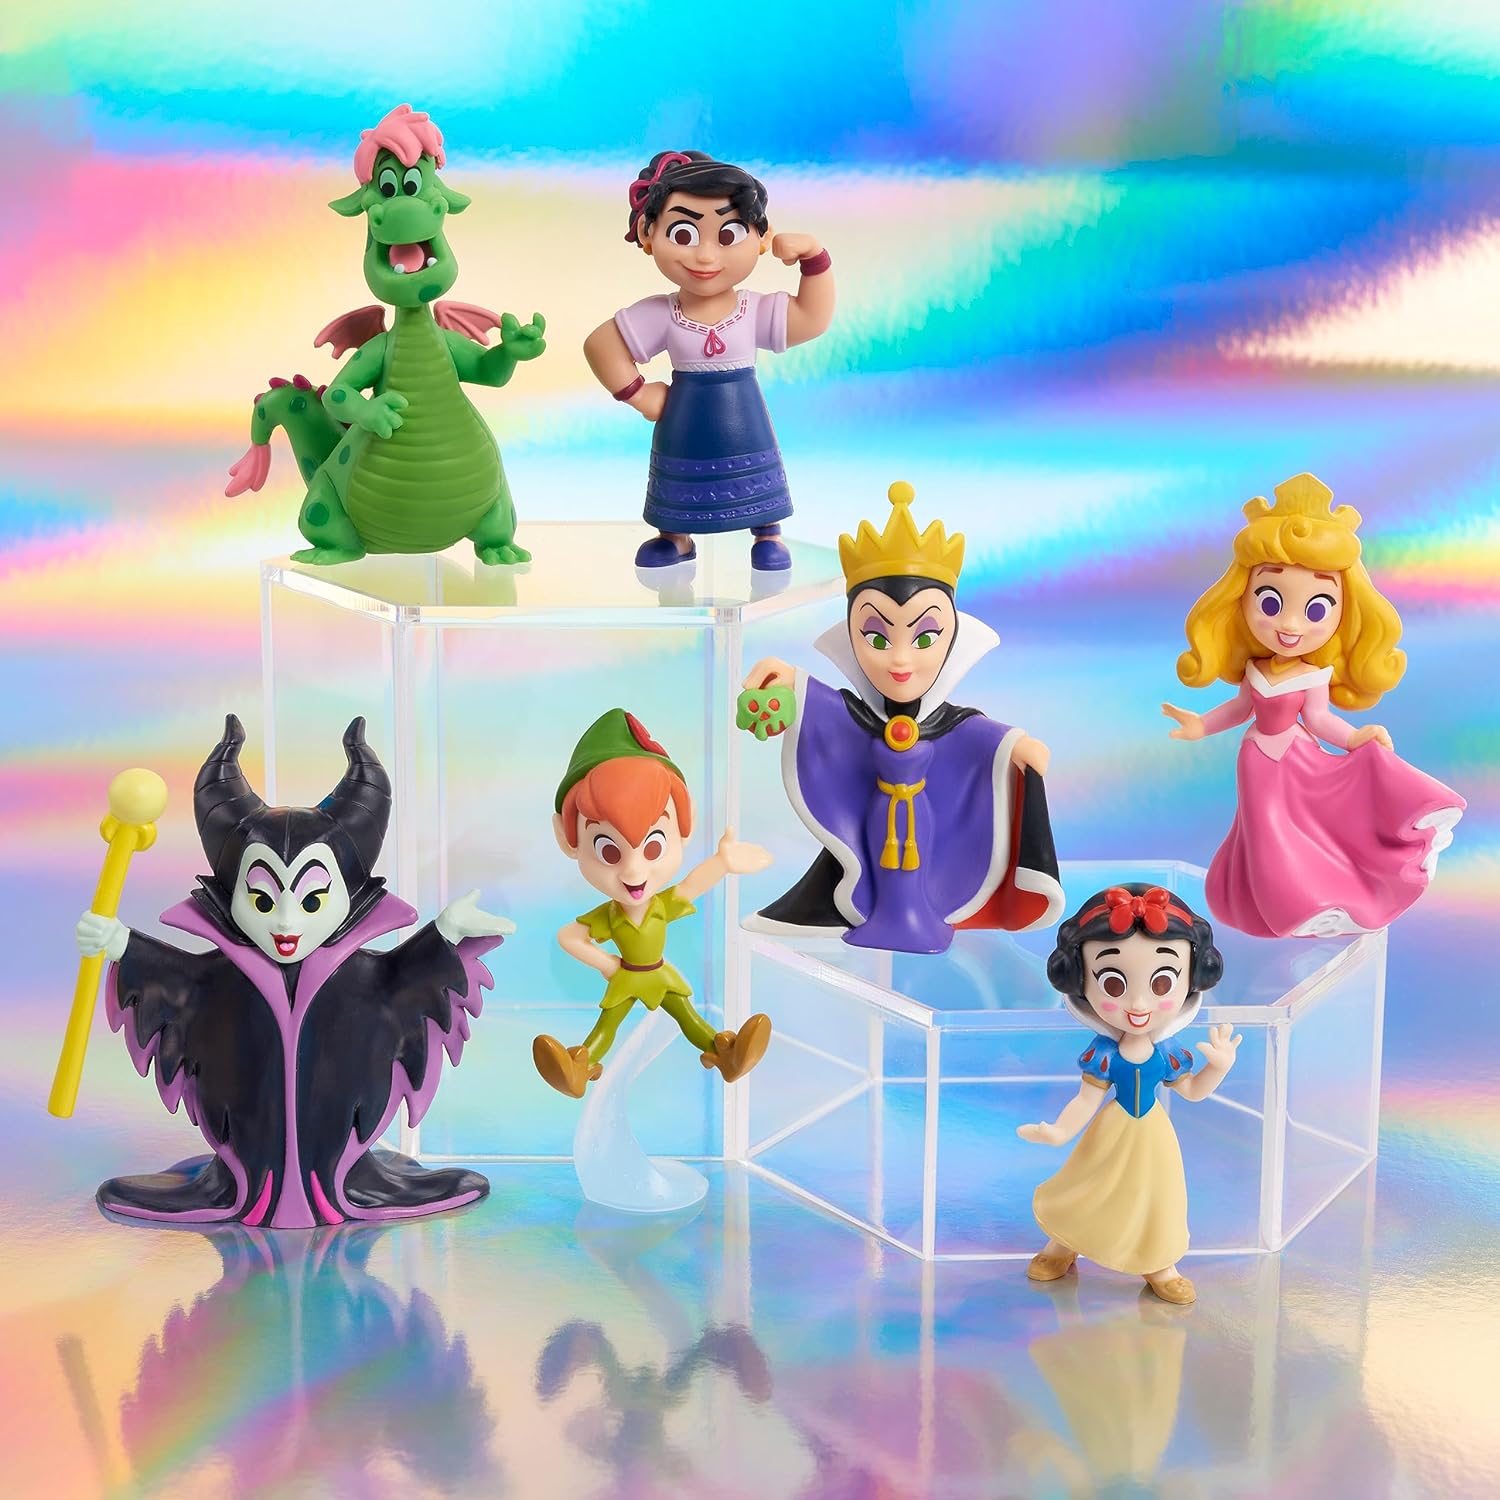 Disney 100 Years of Enchantment Celebration Collection Limited Edition 7-piece Figure Pack, Officially Licensed Kids Toys for Ages 3